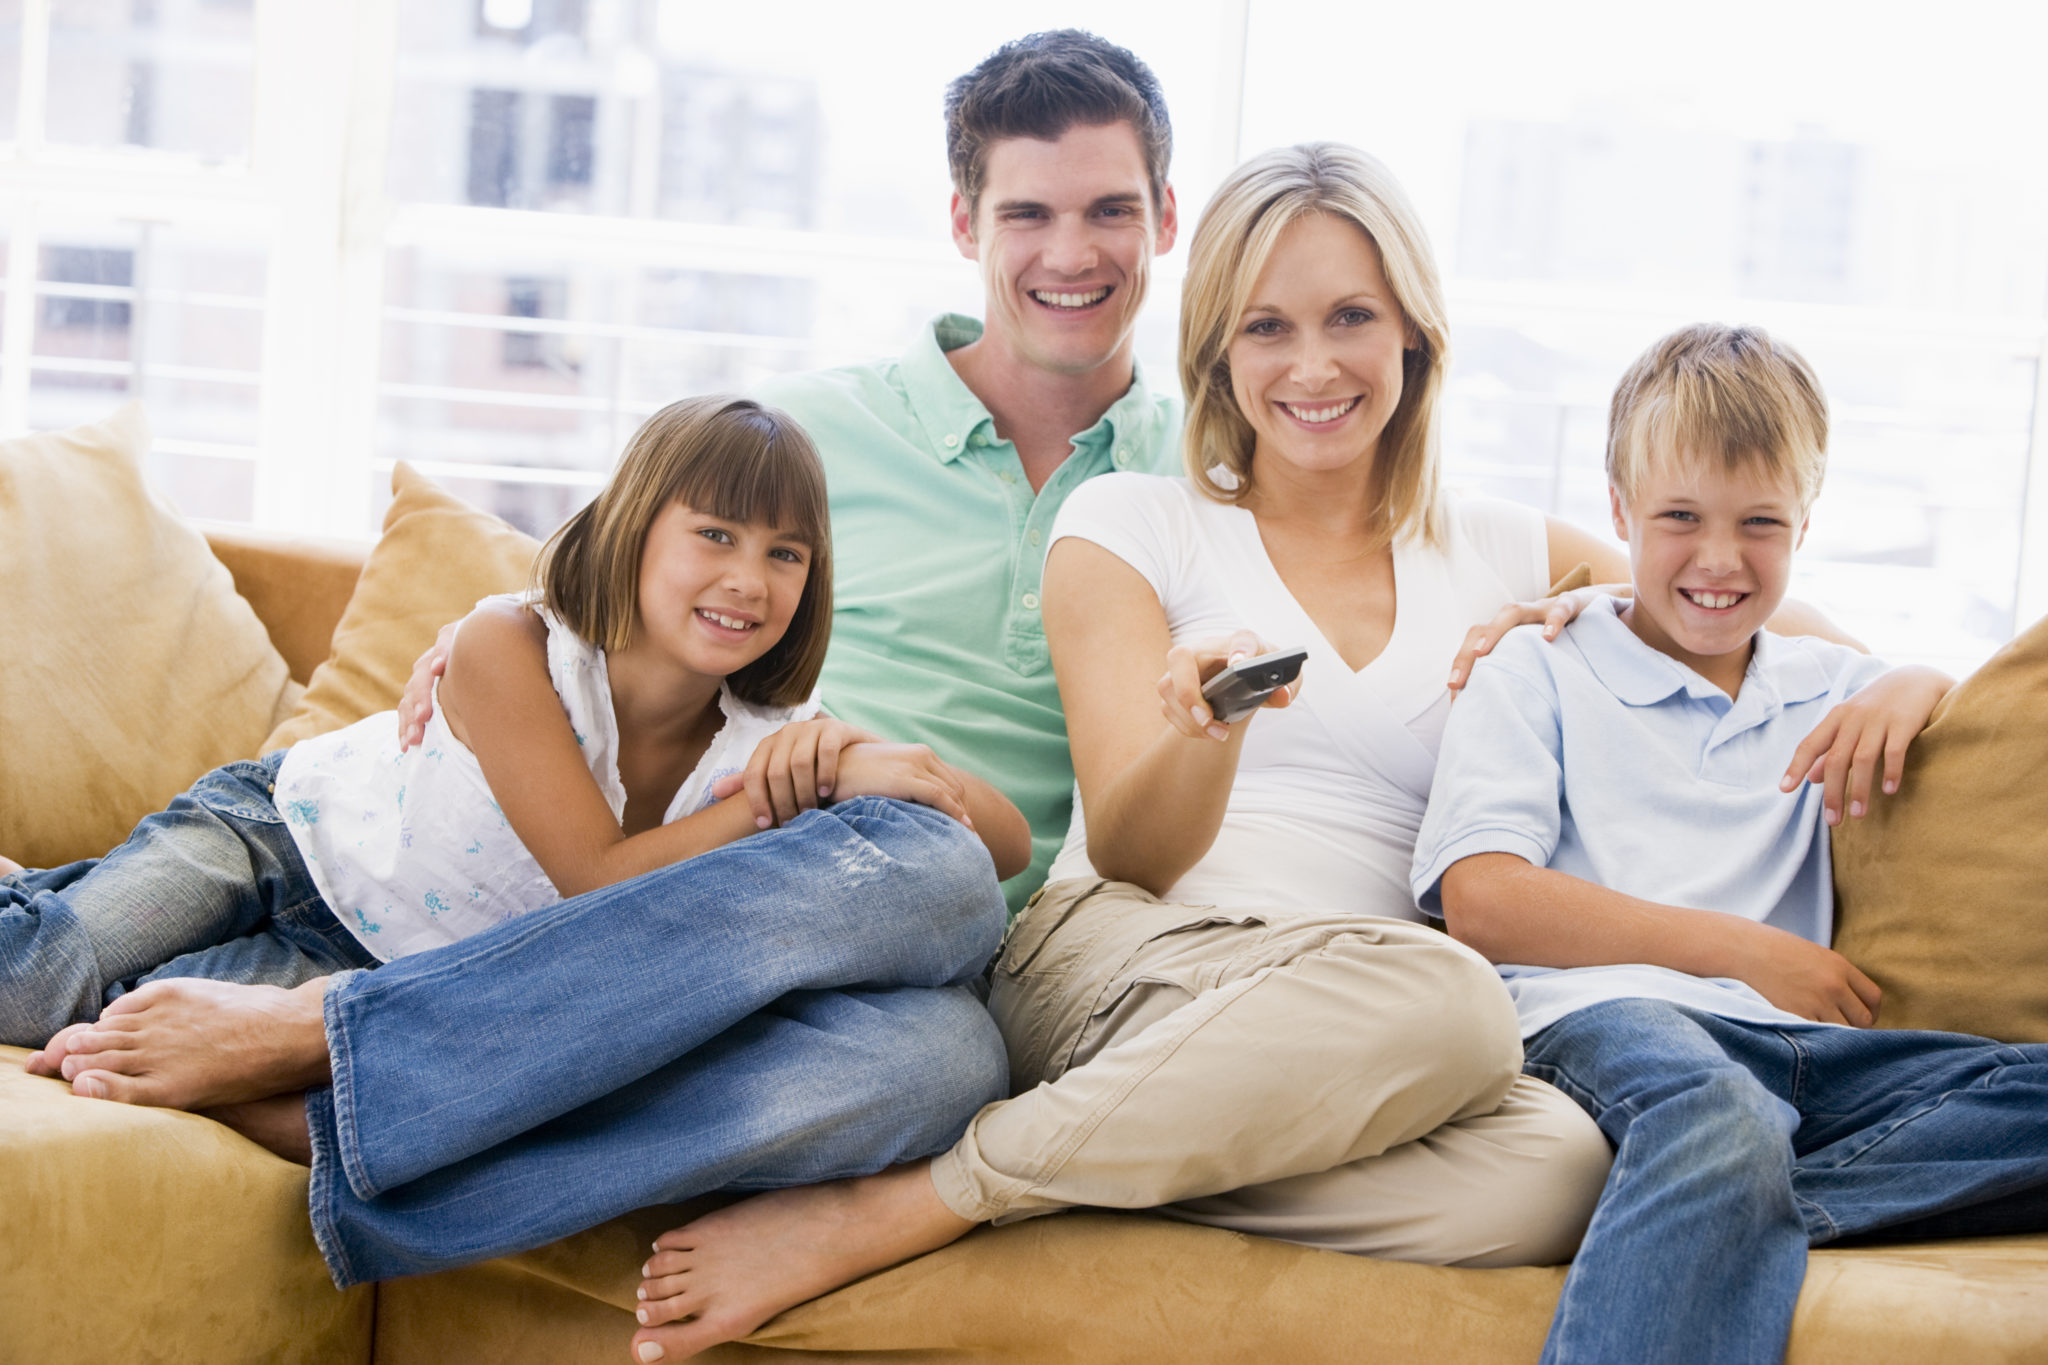 3 Family Friendly Streaming Services To Keep The Whole Family Entertained